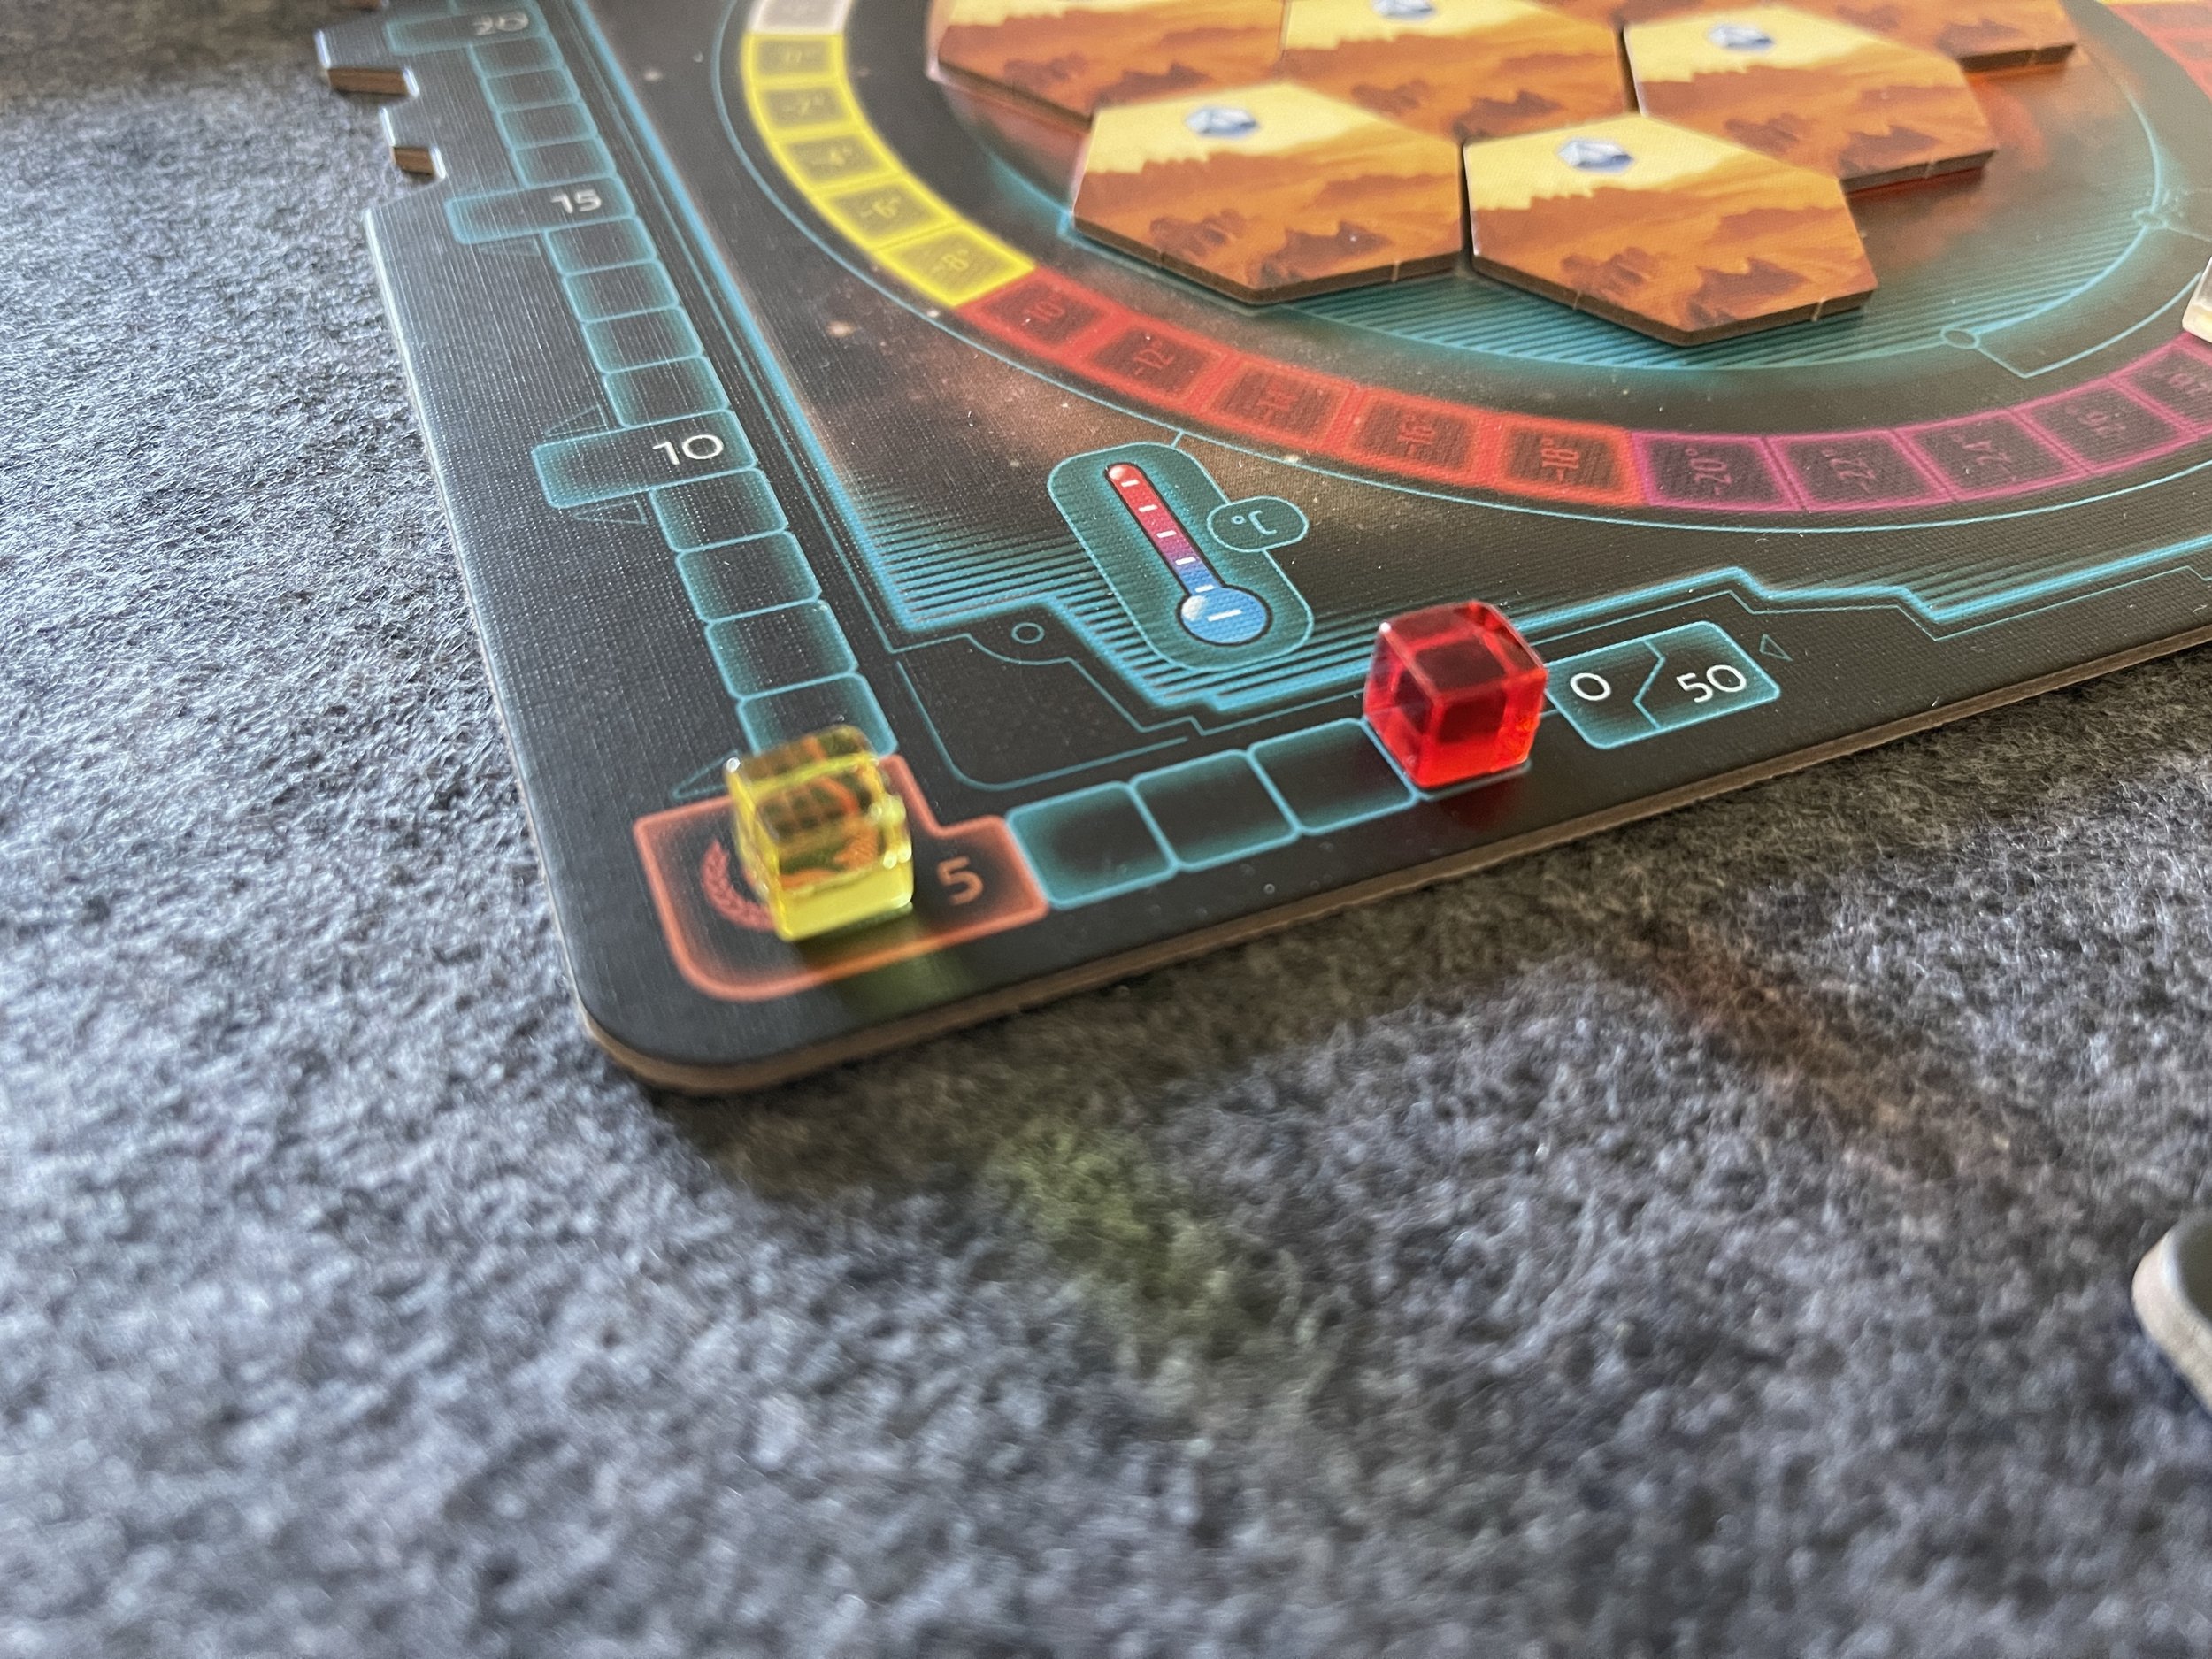 Terraforming Mars review: Turn the “Red Planet” green with this